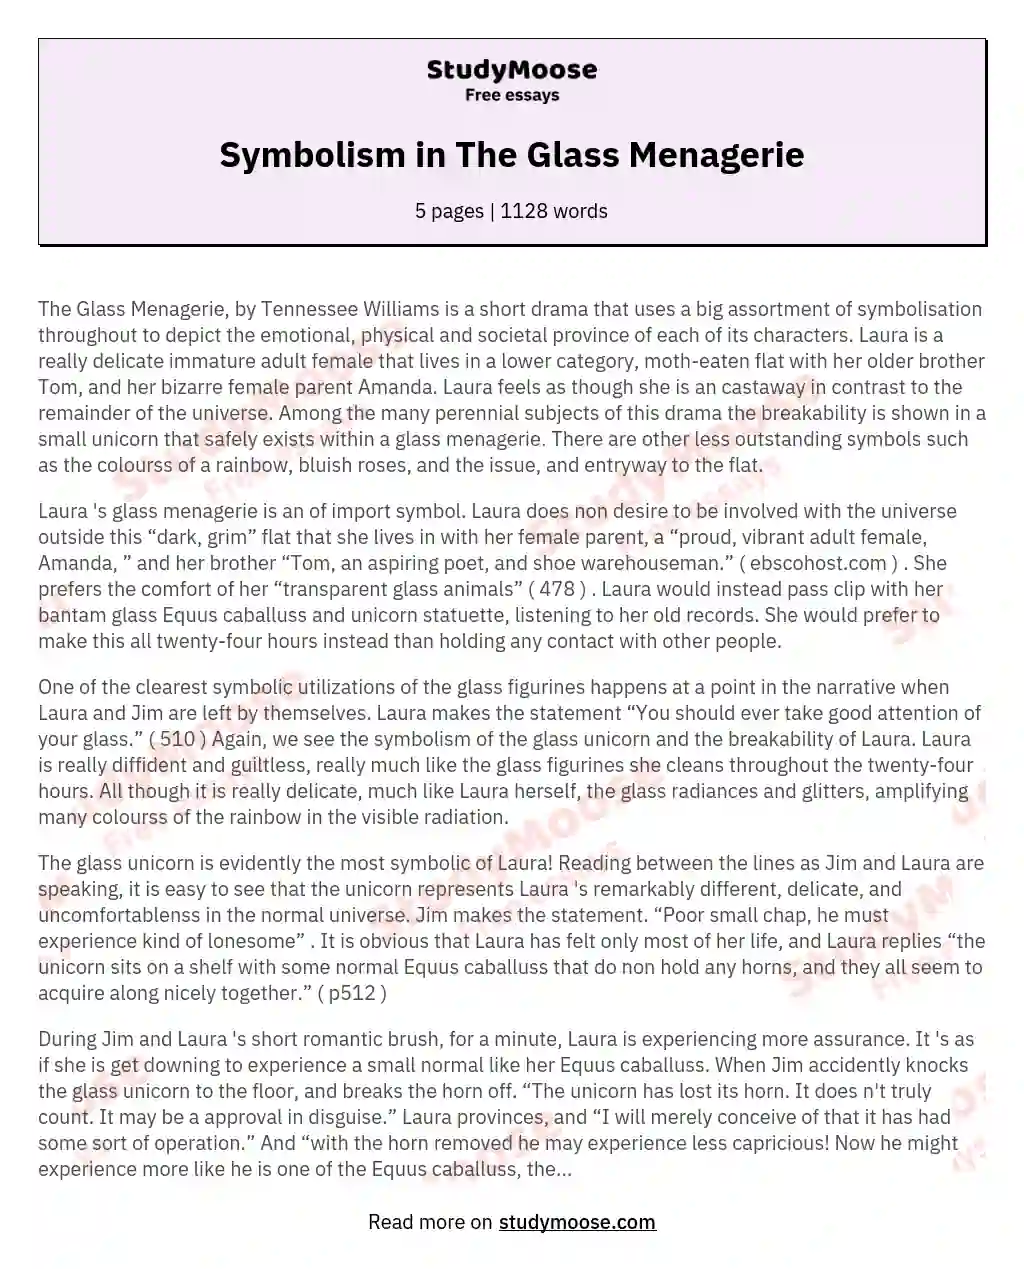 Symbolism in The Glass Menagerie